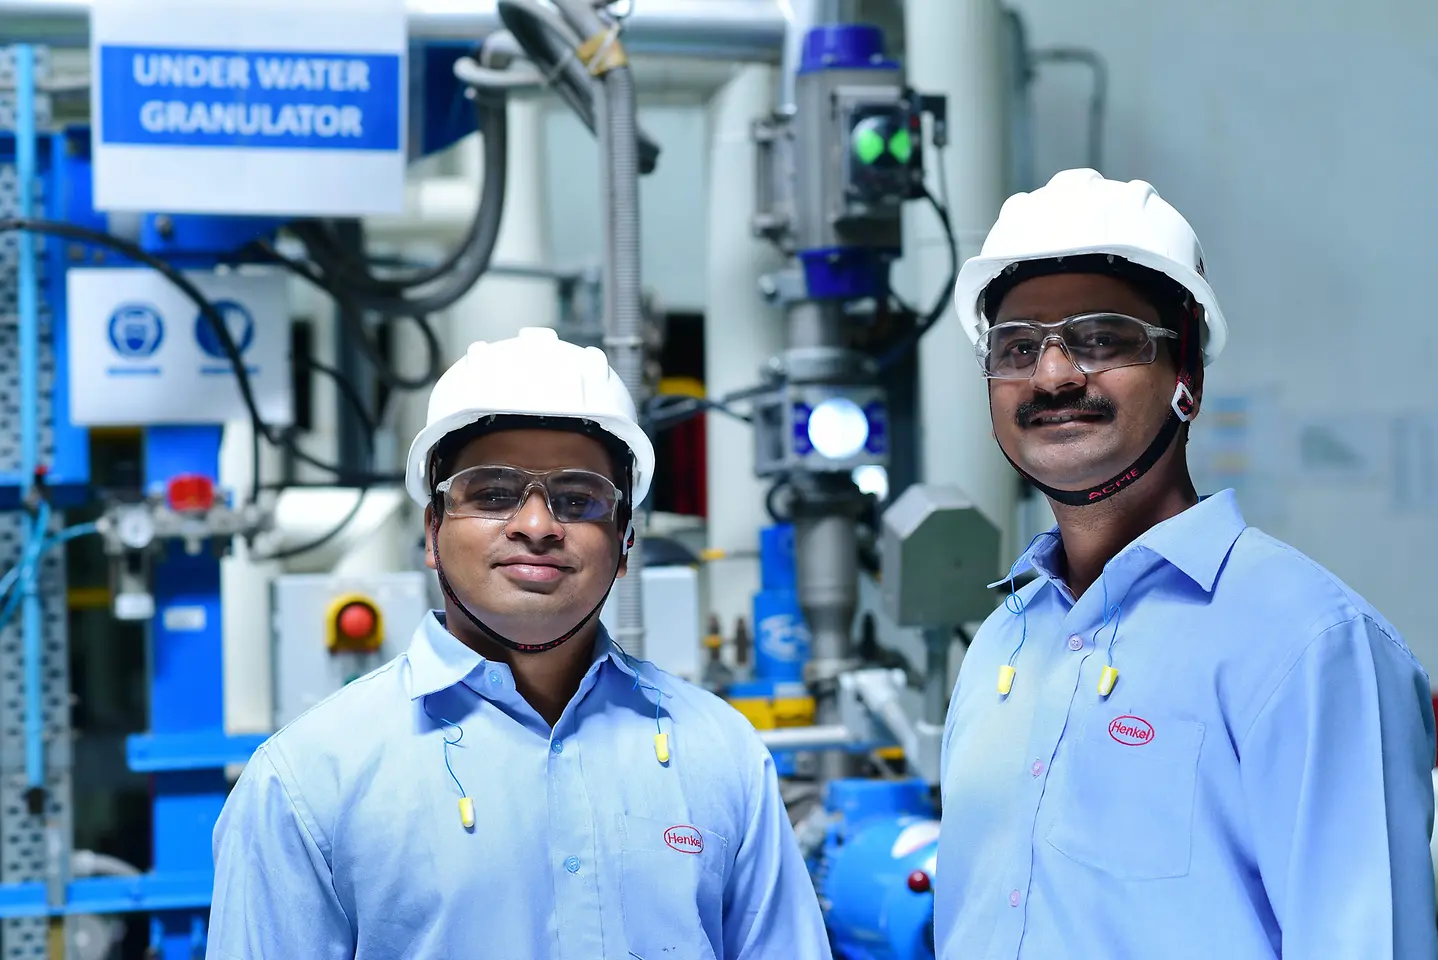 
Production of water-based adhesives at Thane site, India